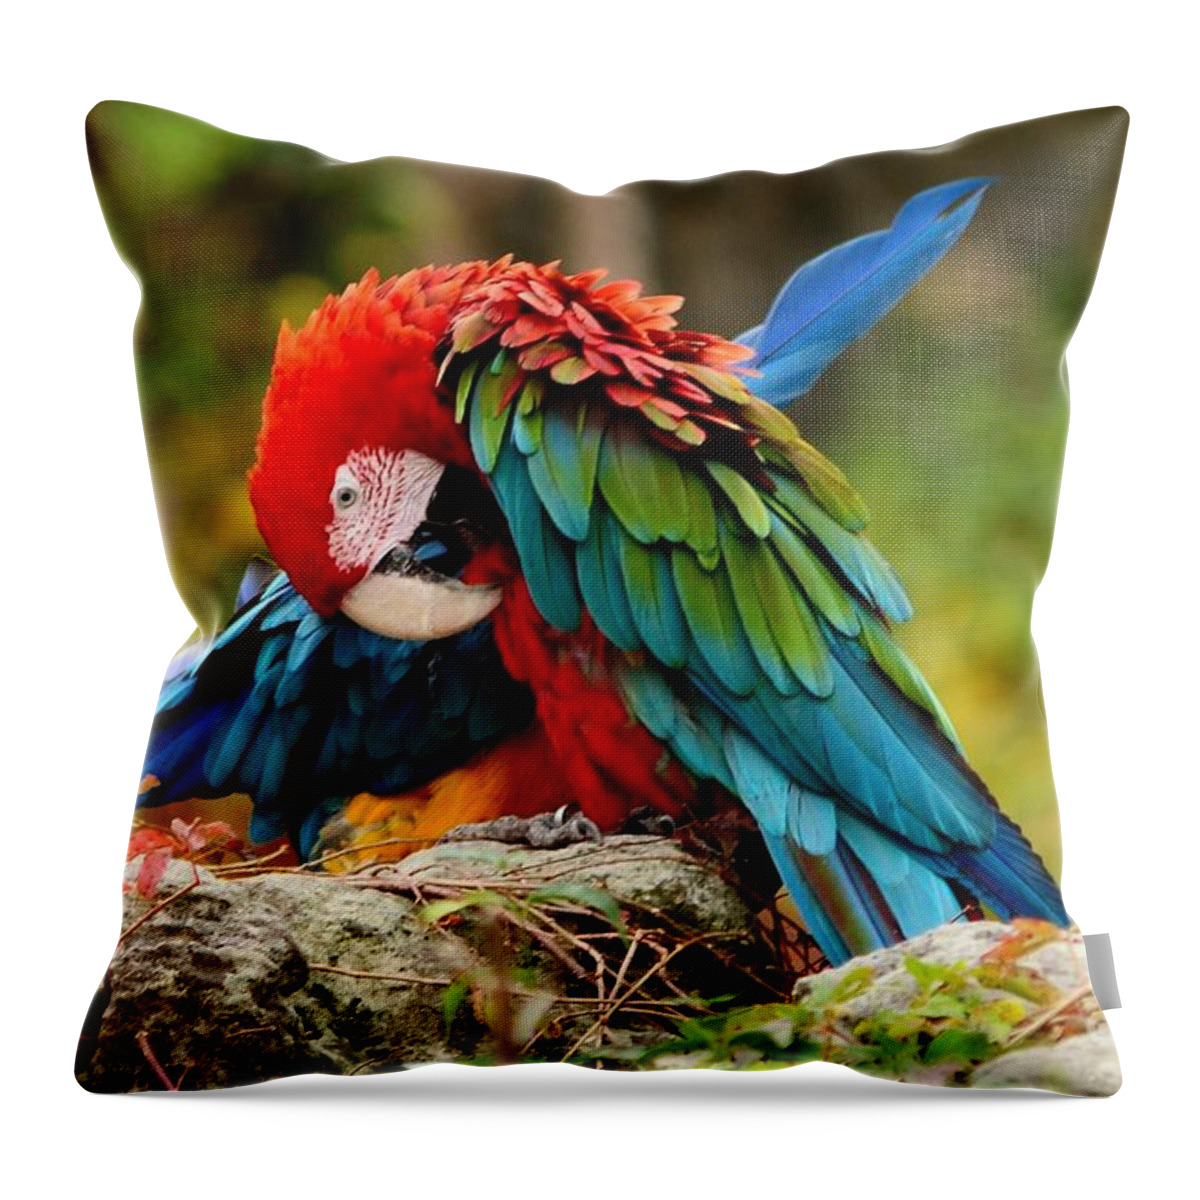 Bird Throw Pillow featuring the photograph Scarlet Macaw by Elaine Manley